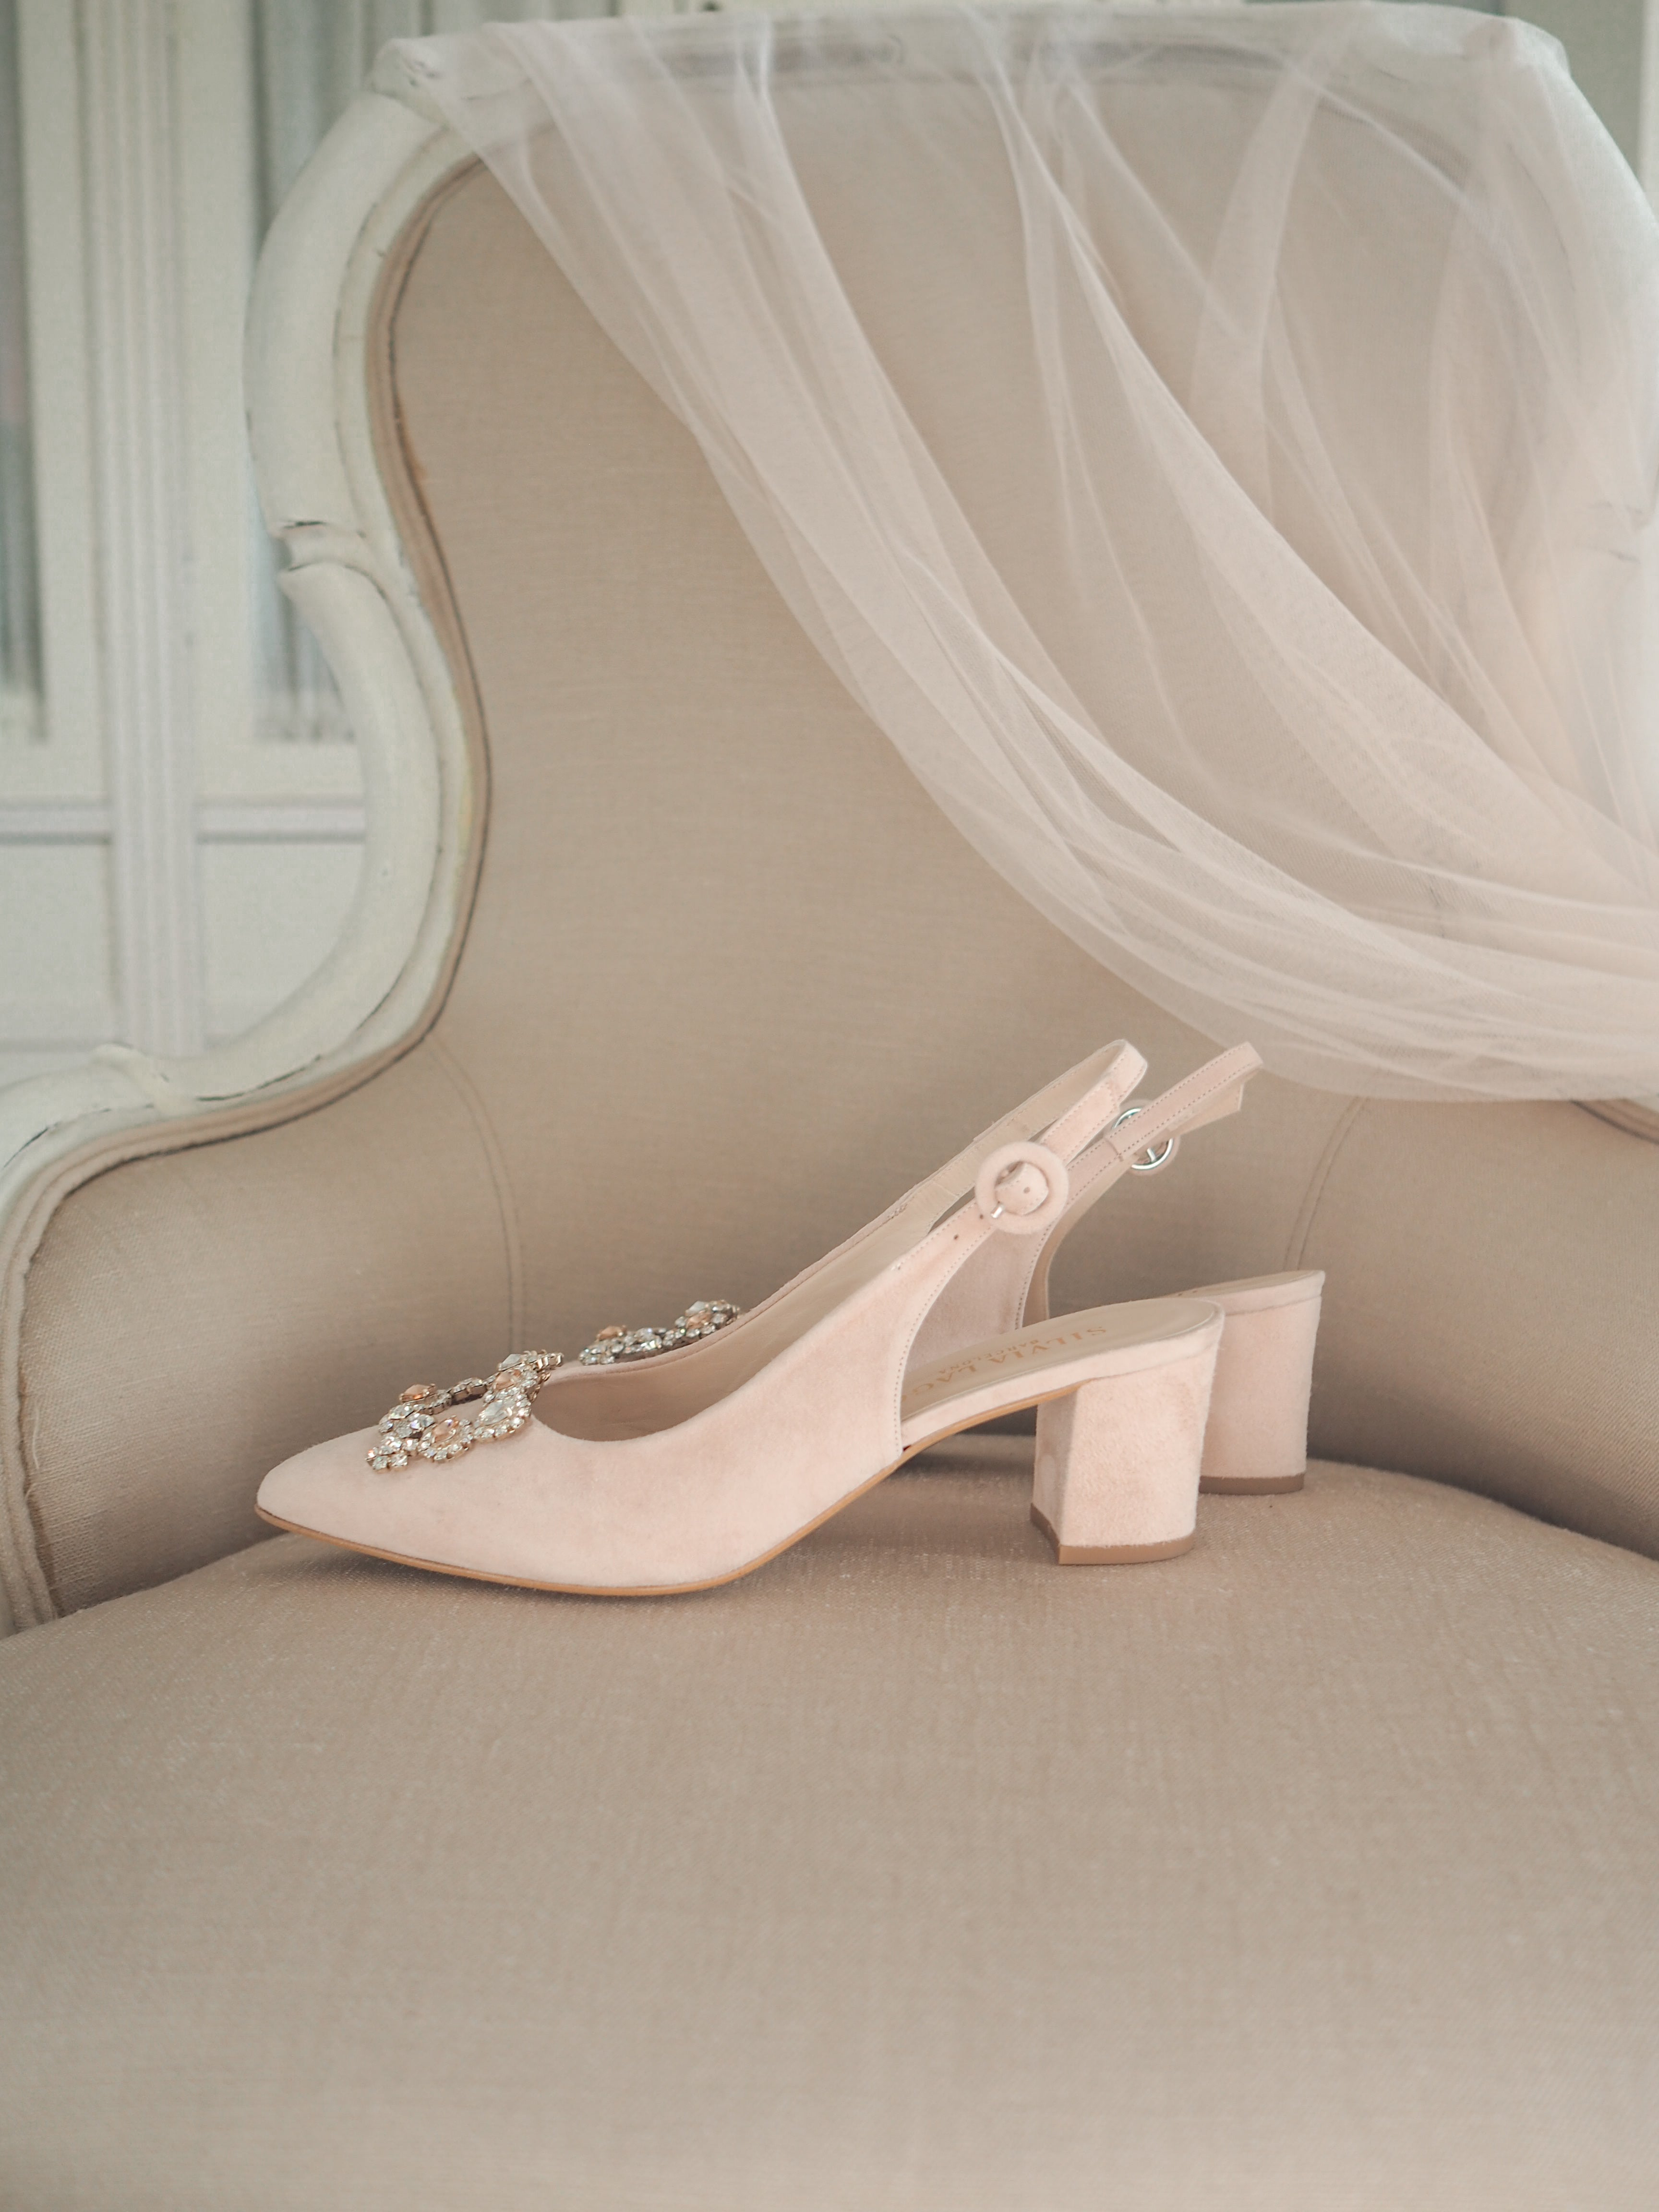 Lady Audrey 50 sling -  SILVIA LAGO | Classy shoes